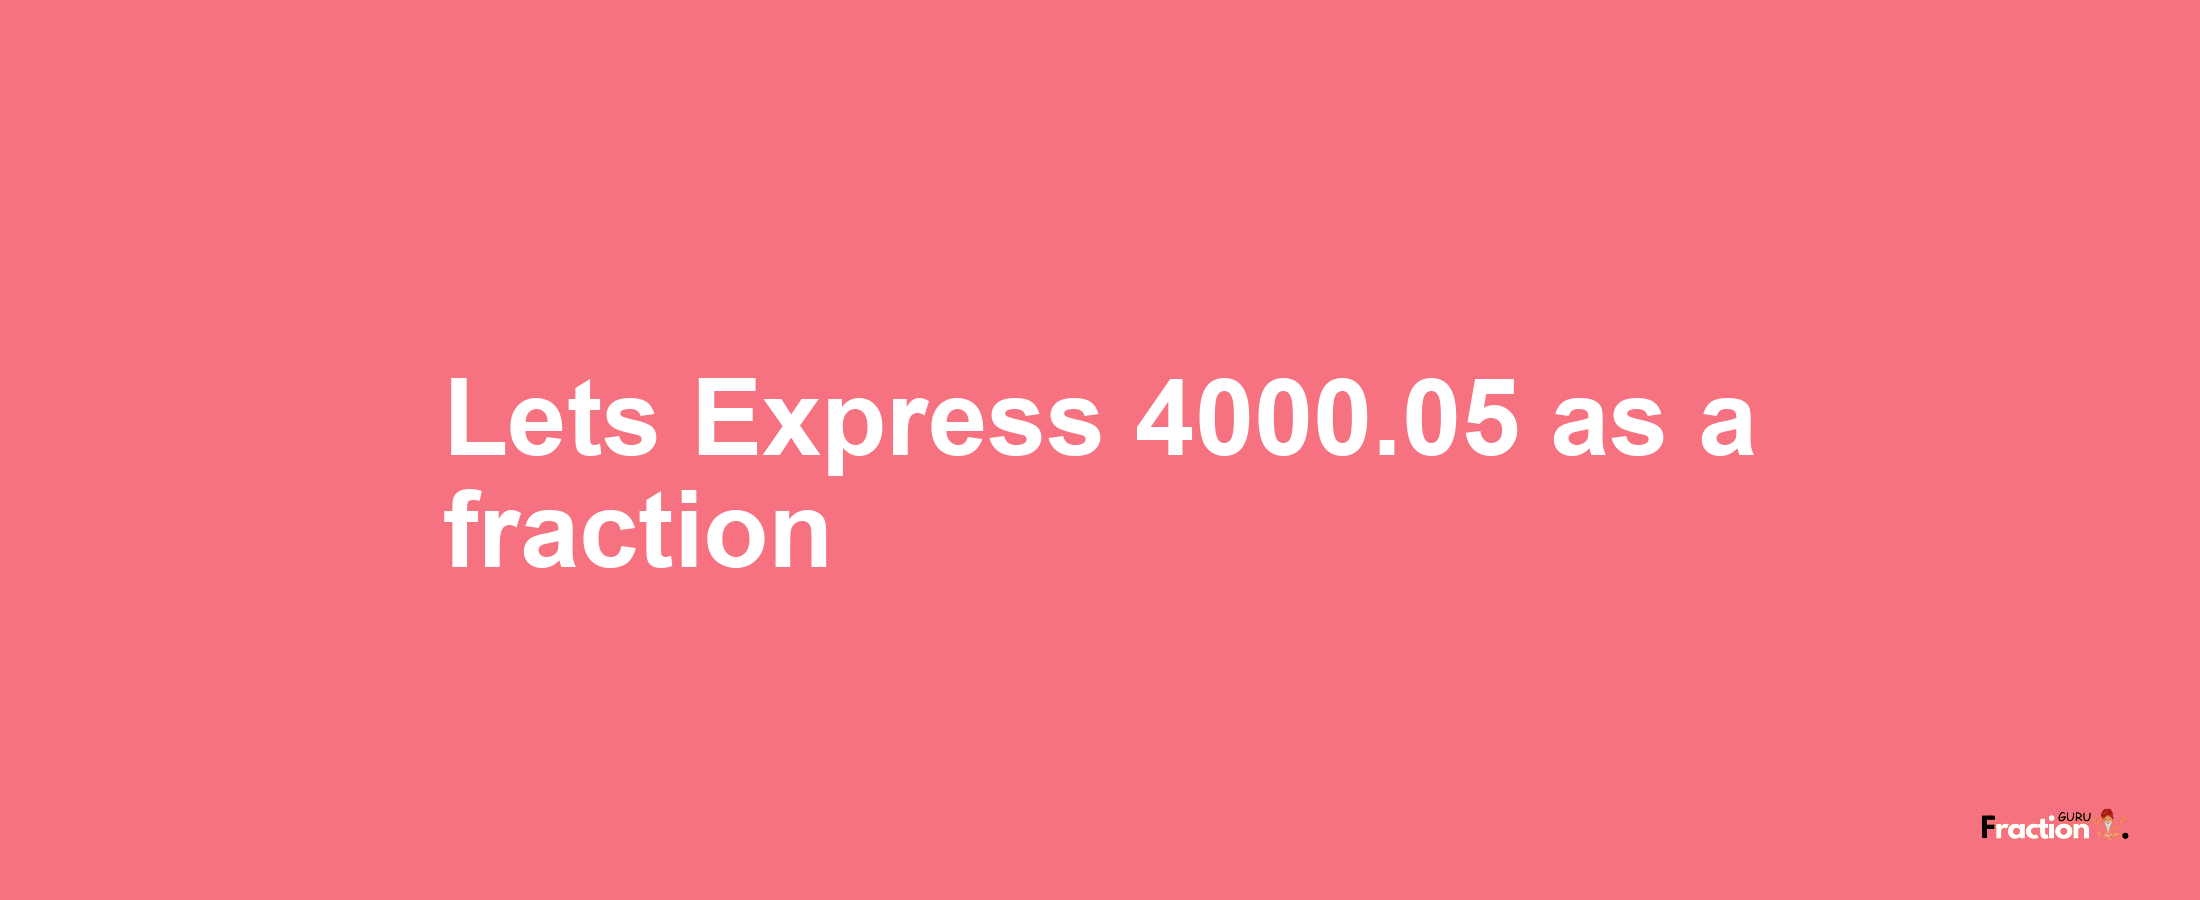 Lets Express 4000.05 as afraction